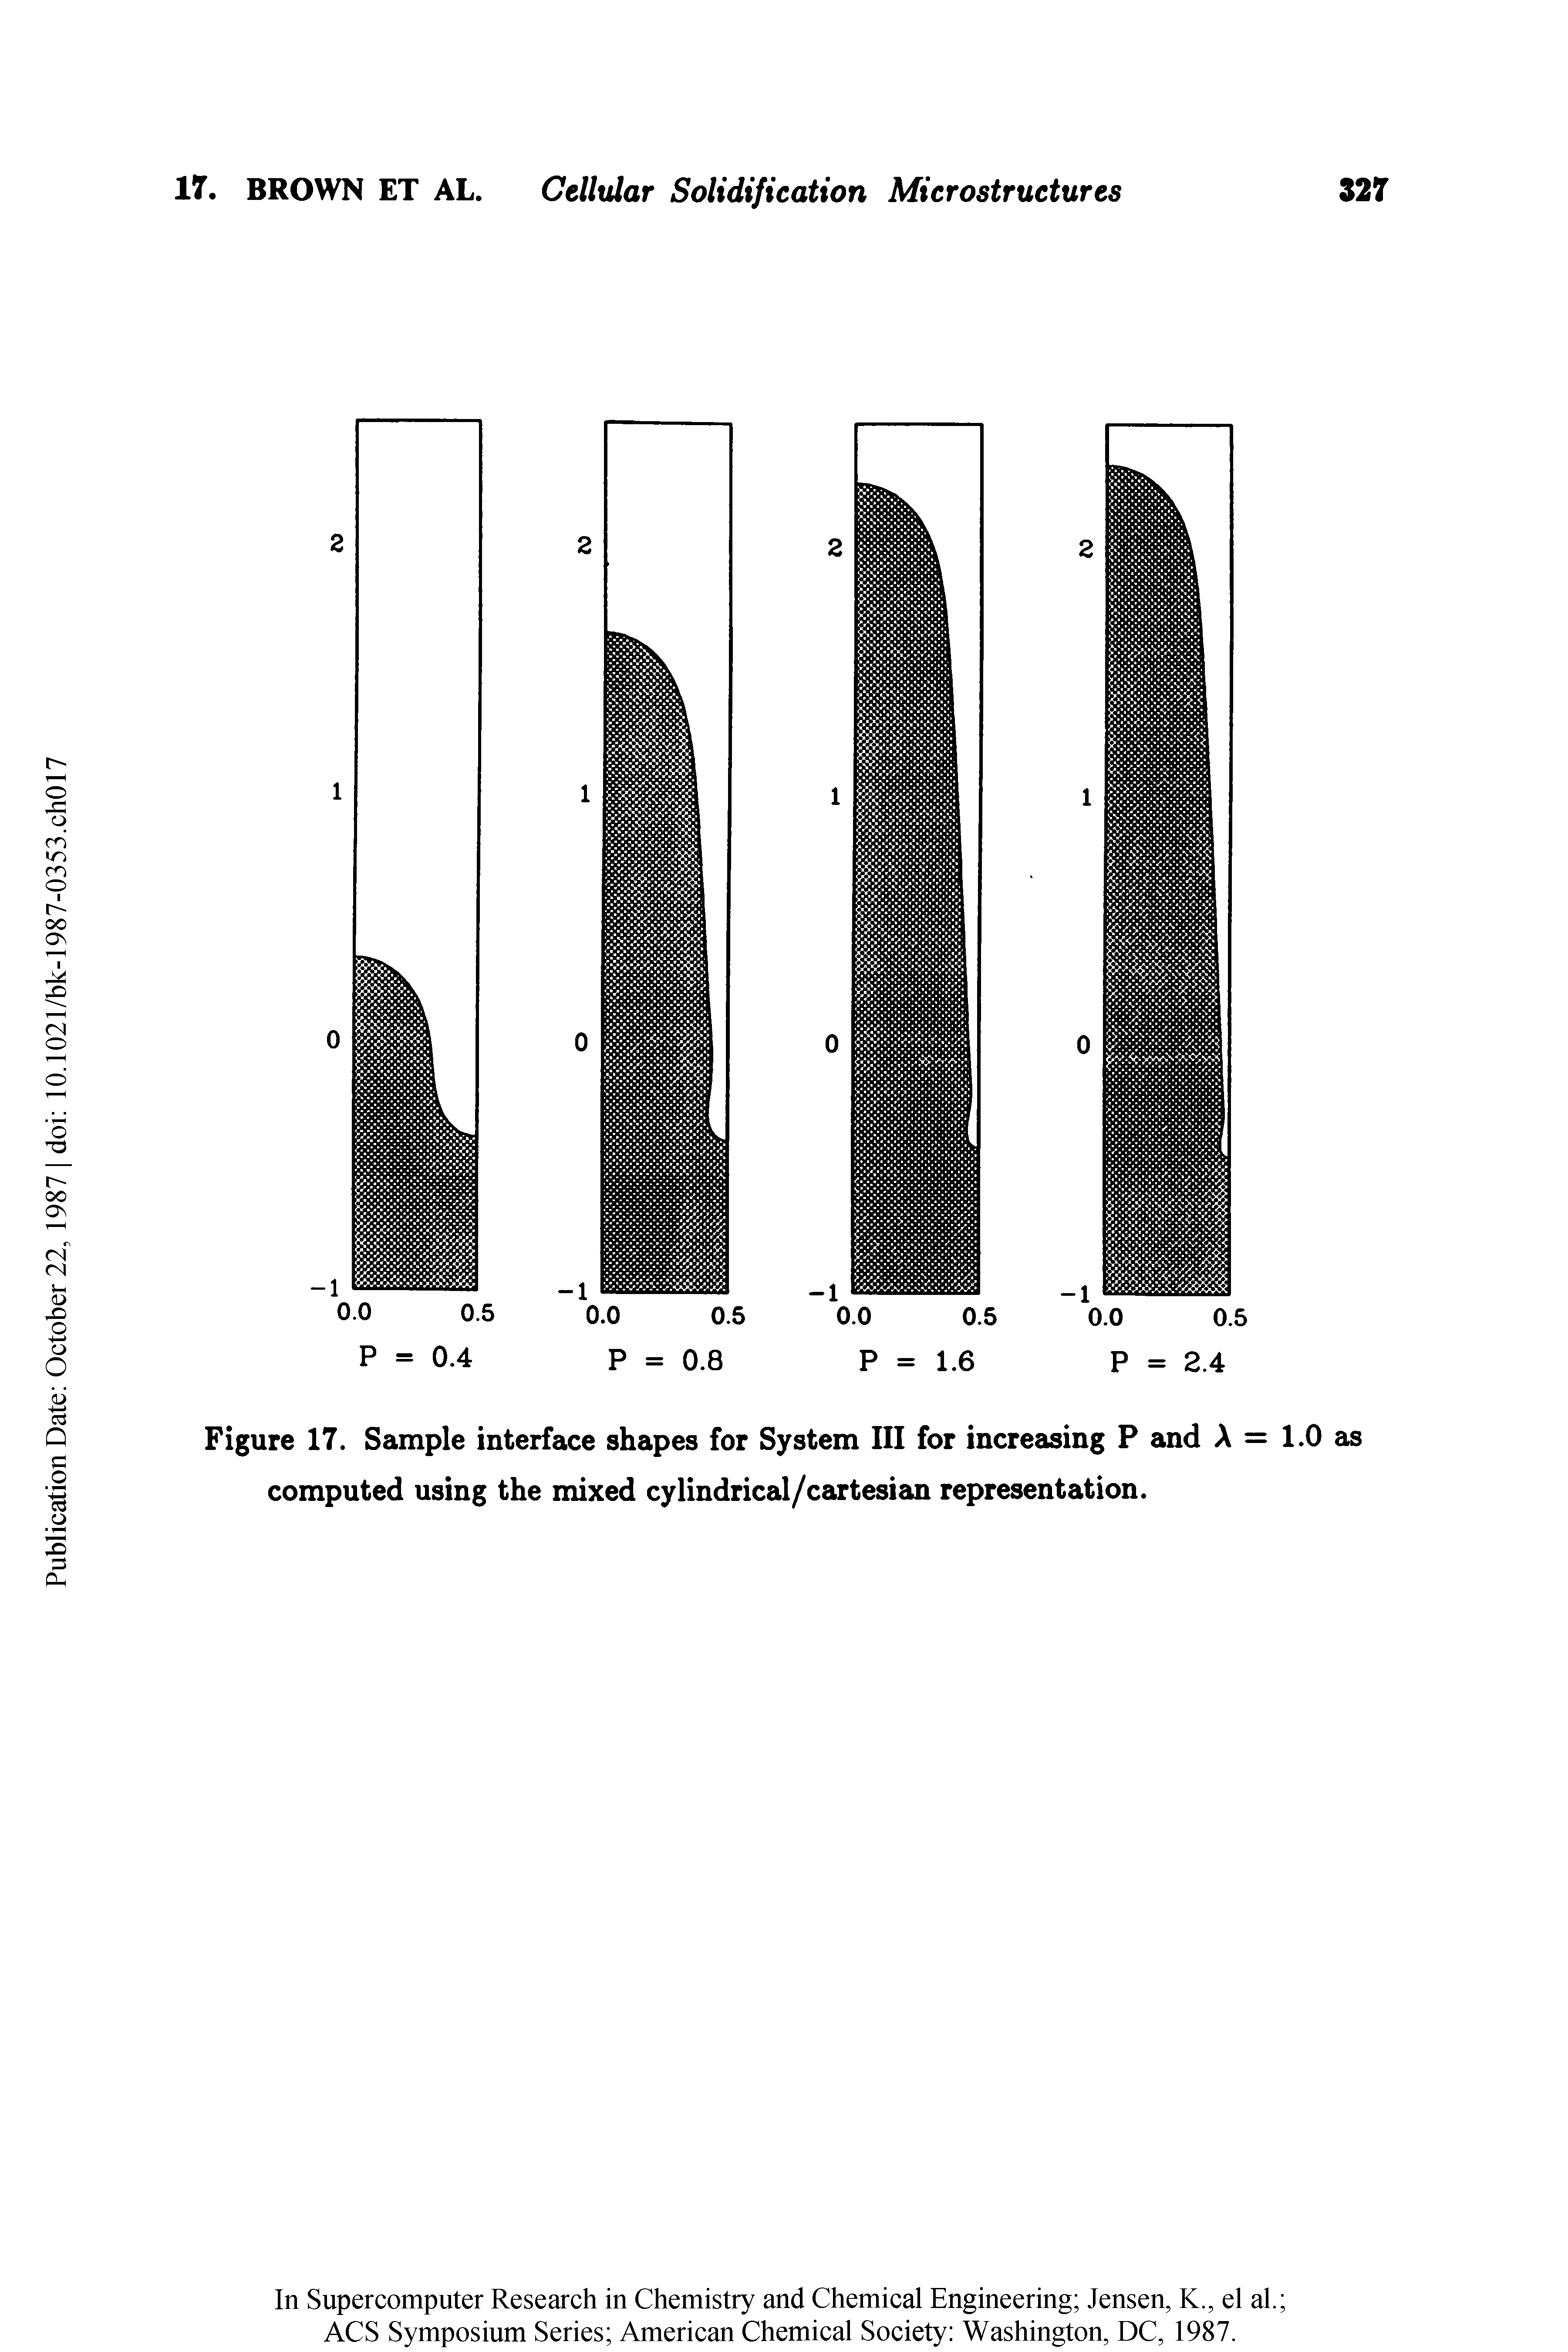 Figure 17. Sample interface shapes for System III for increasing P and A = 1.0 as computed using the mixed cylindrical/cartesian representation.